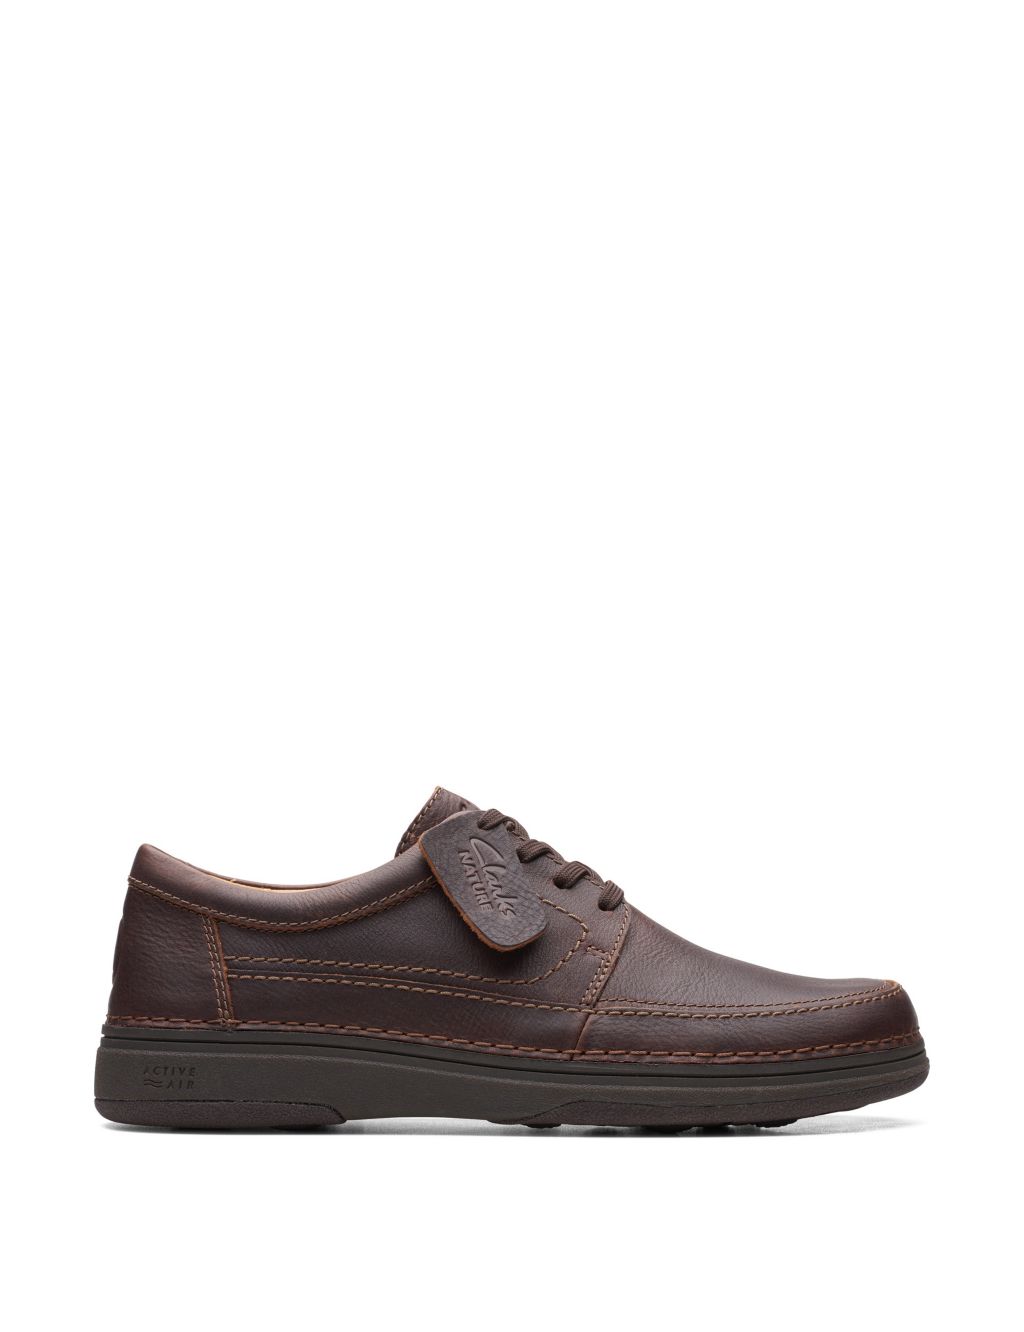 Leather Casual Shoes image 1